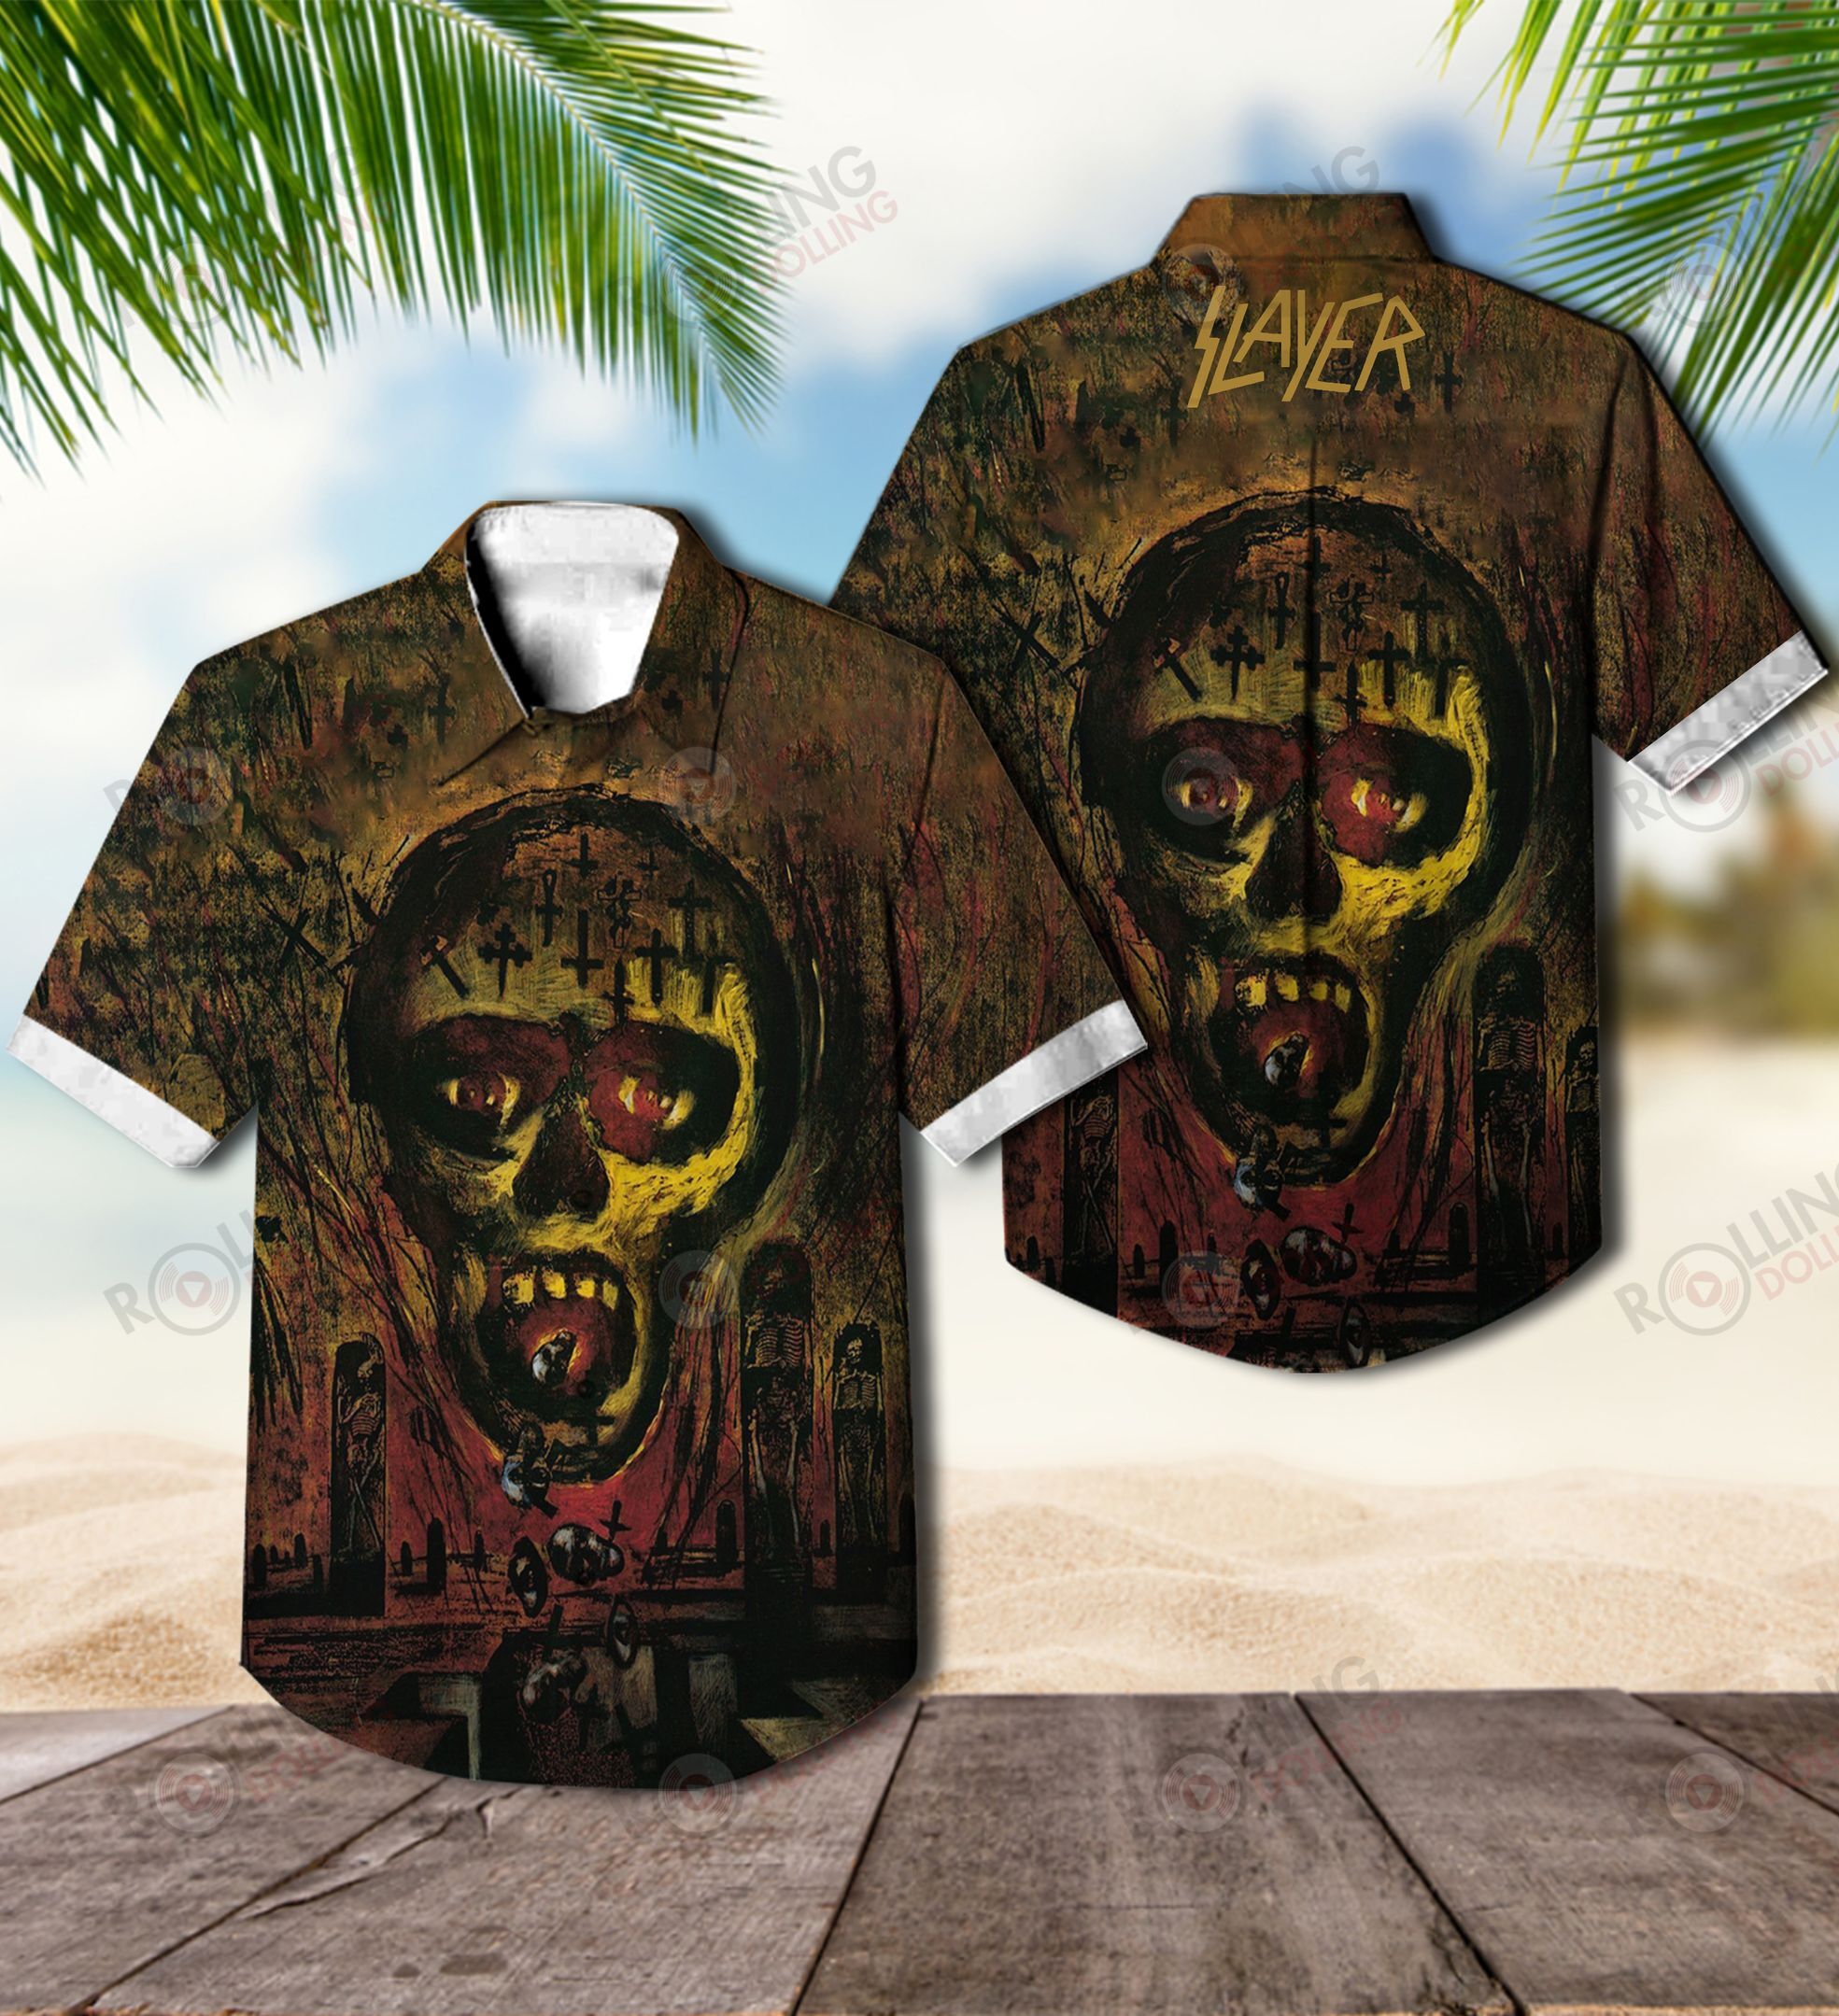 Now you can show off your love of all things band with this Hawaiian Shirt 53